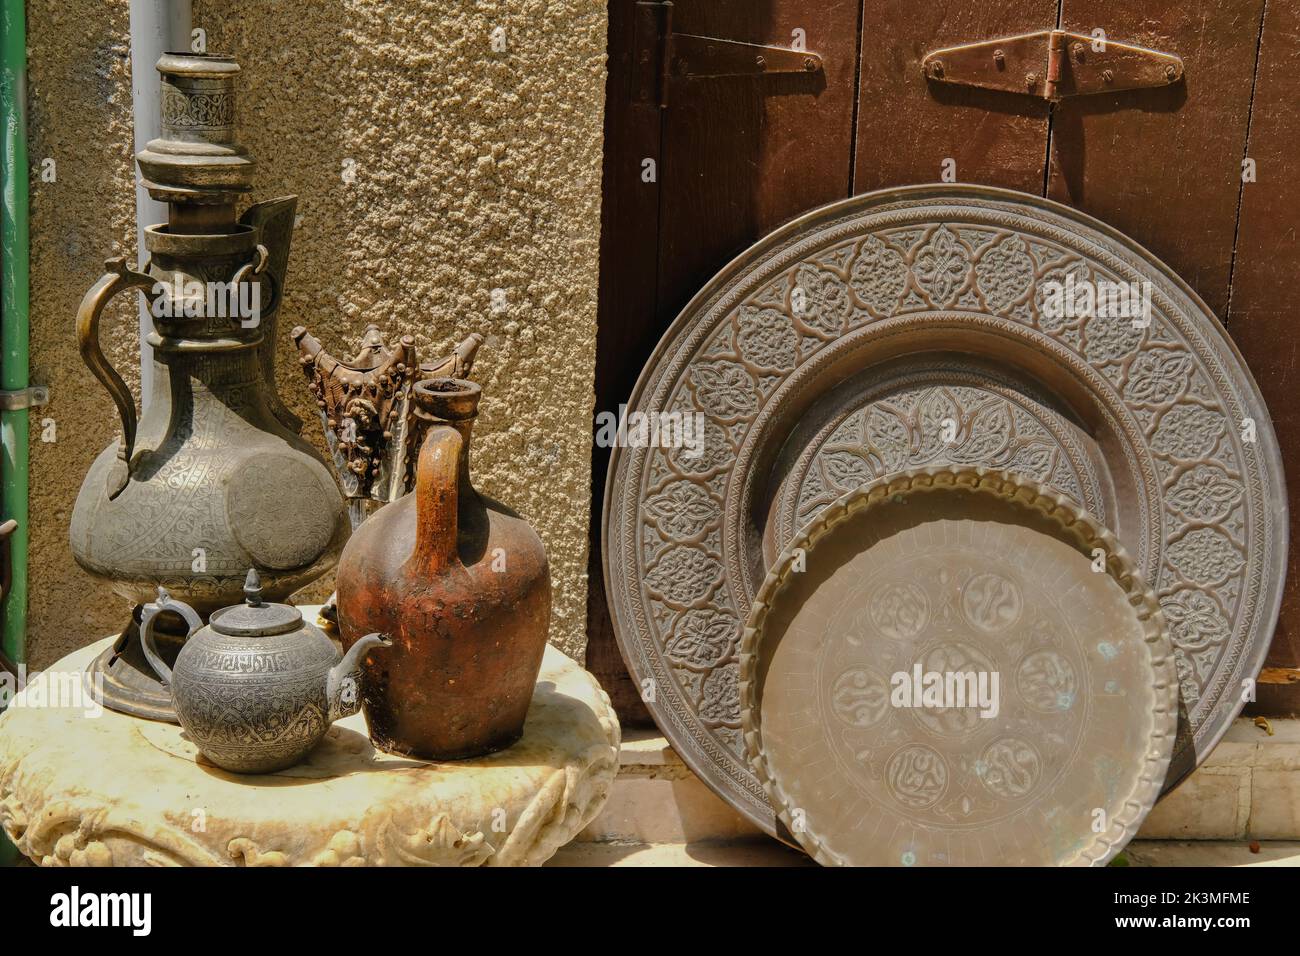 Arabian-style cookware in the street souvenir store.Traditional Gulf and African countries utensil Stock Photo